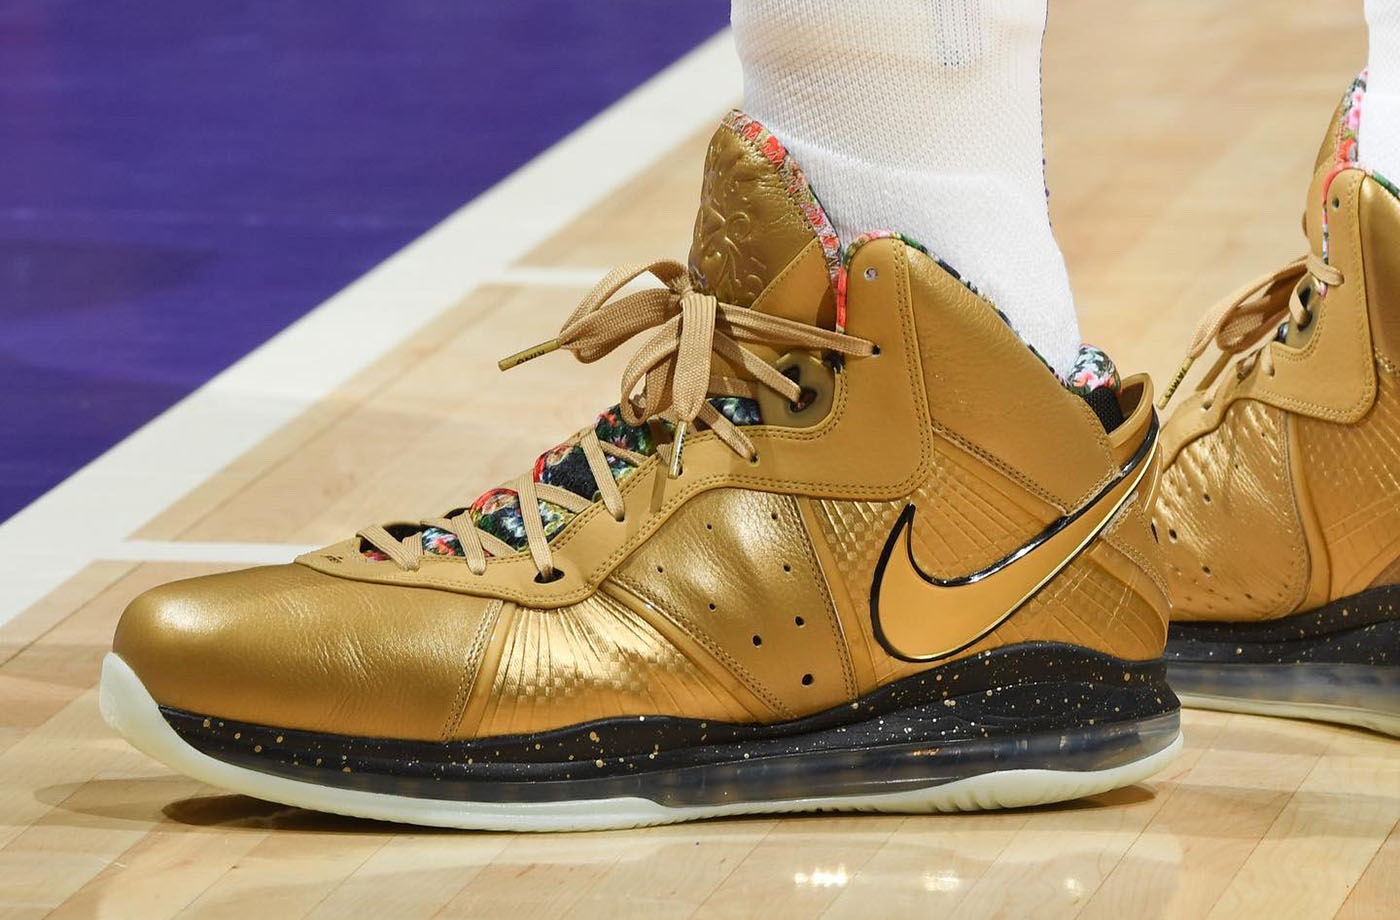 LeBron James in the Nike LeBron 8 "Watch The Throne" SoleSavy